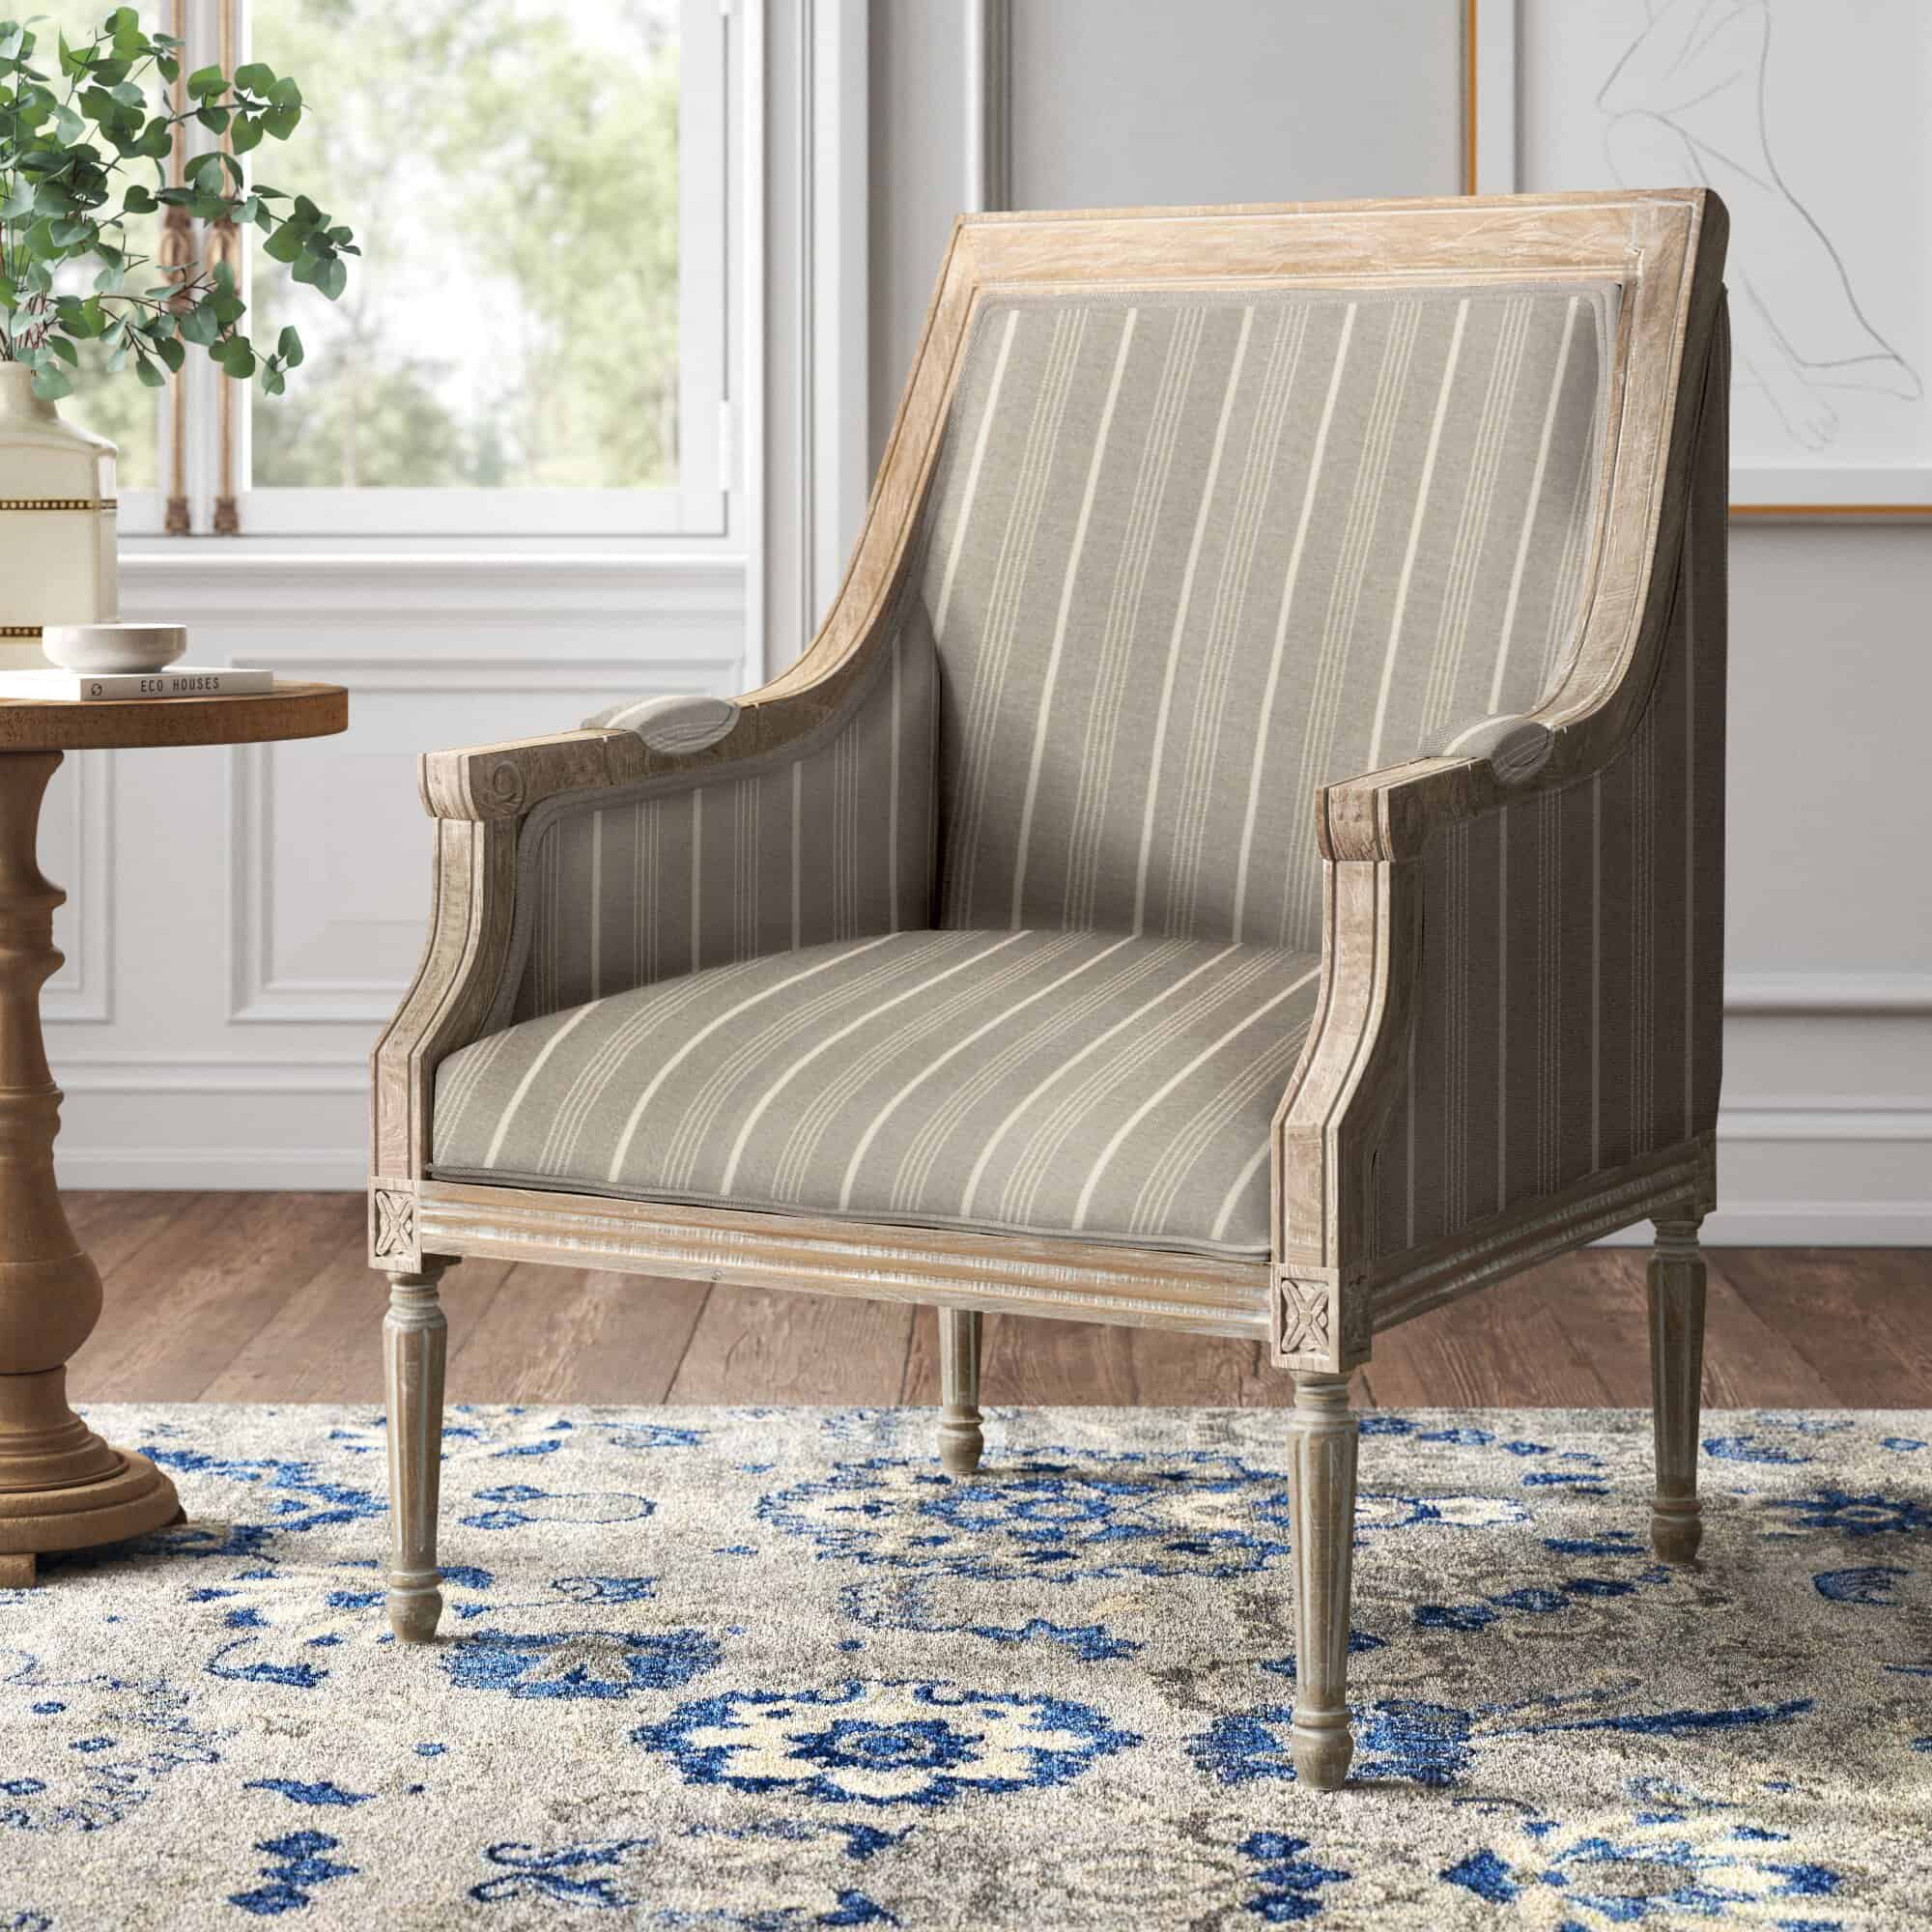 This French Classic Will Fit Perfectly in Your Farmhouse Living Room